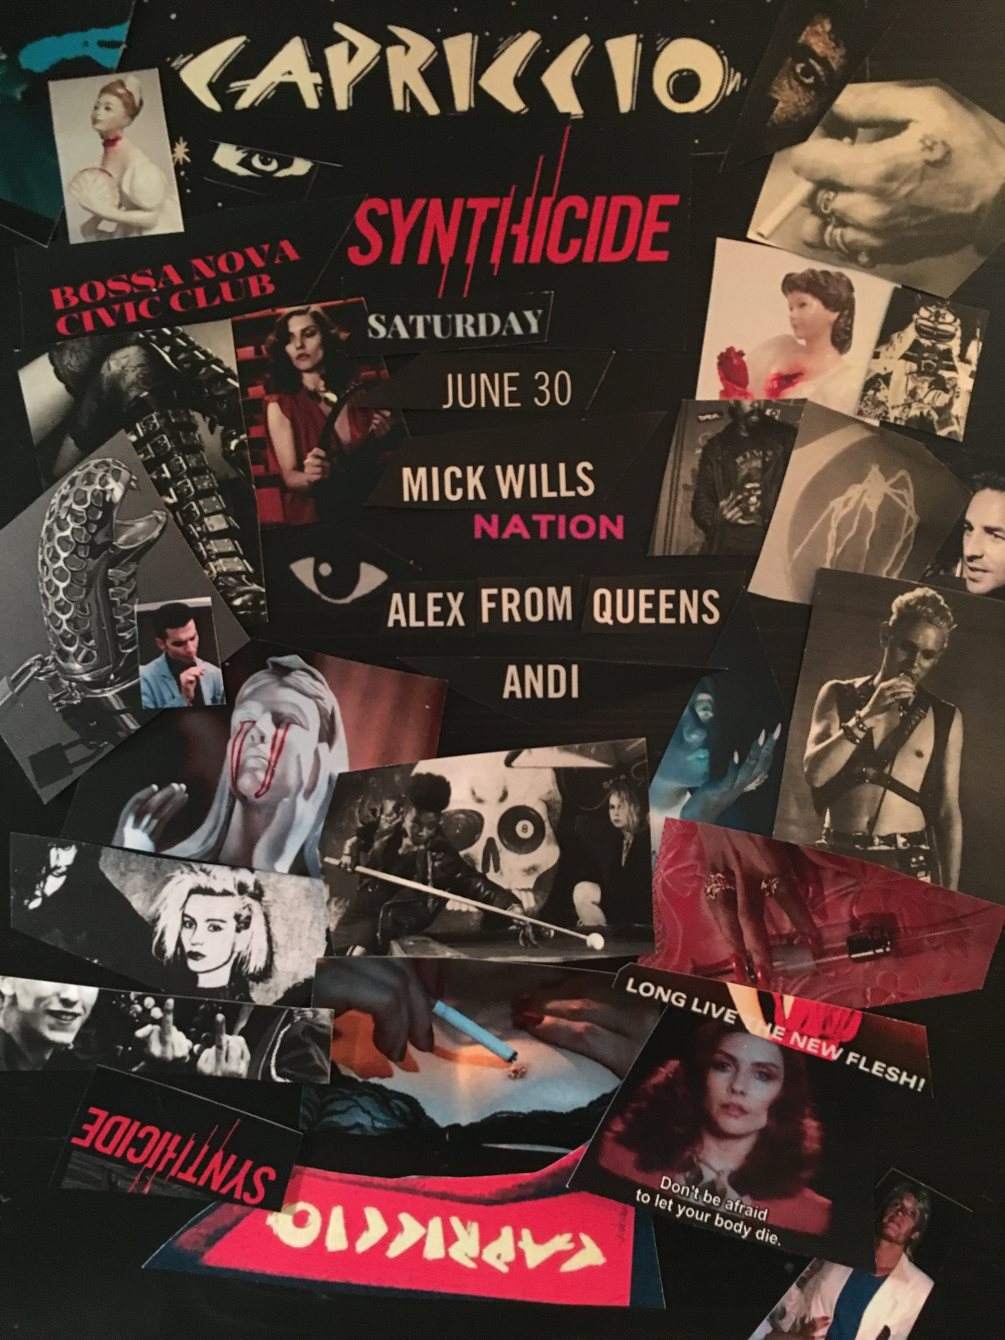 Capriccio X Synthicide: Mick Wills, Alex From Queens, Andi - Página frontal